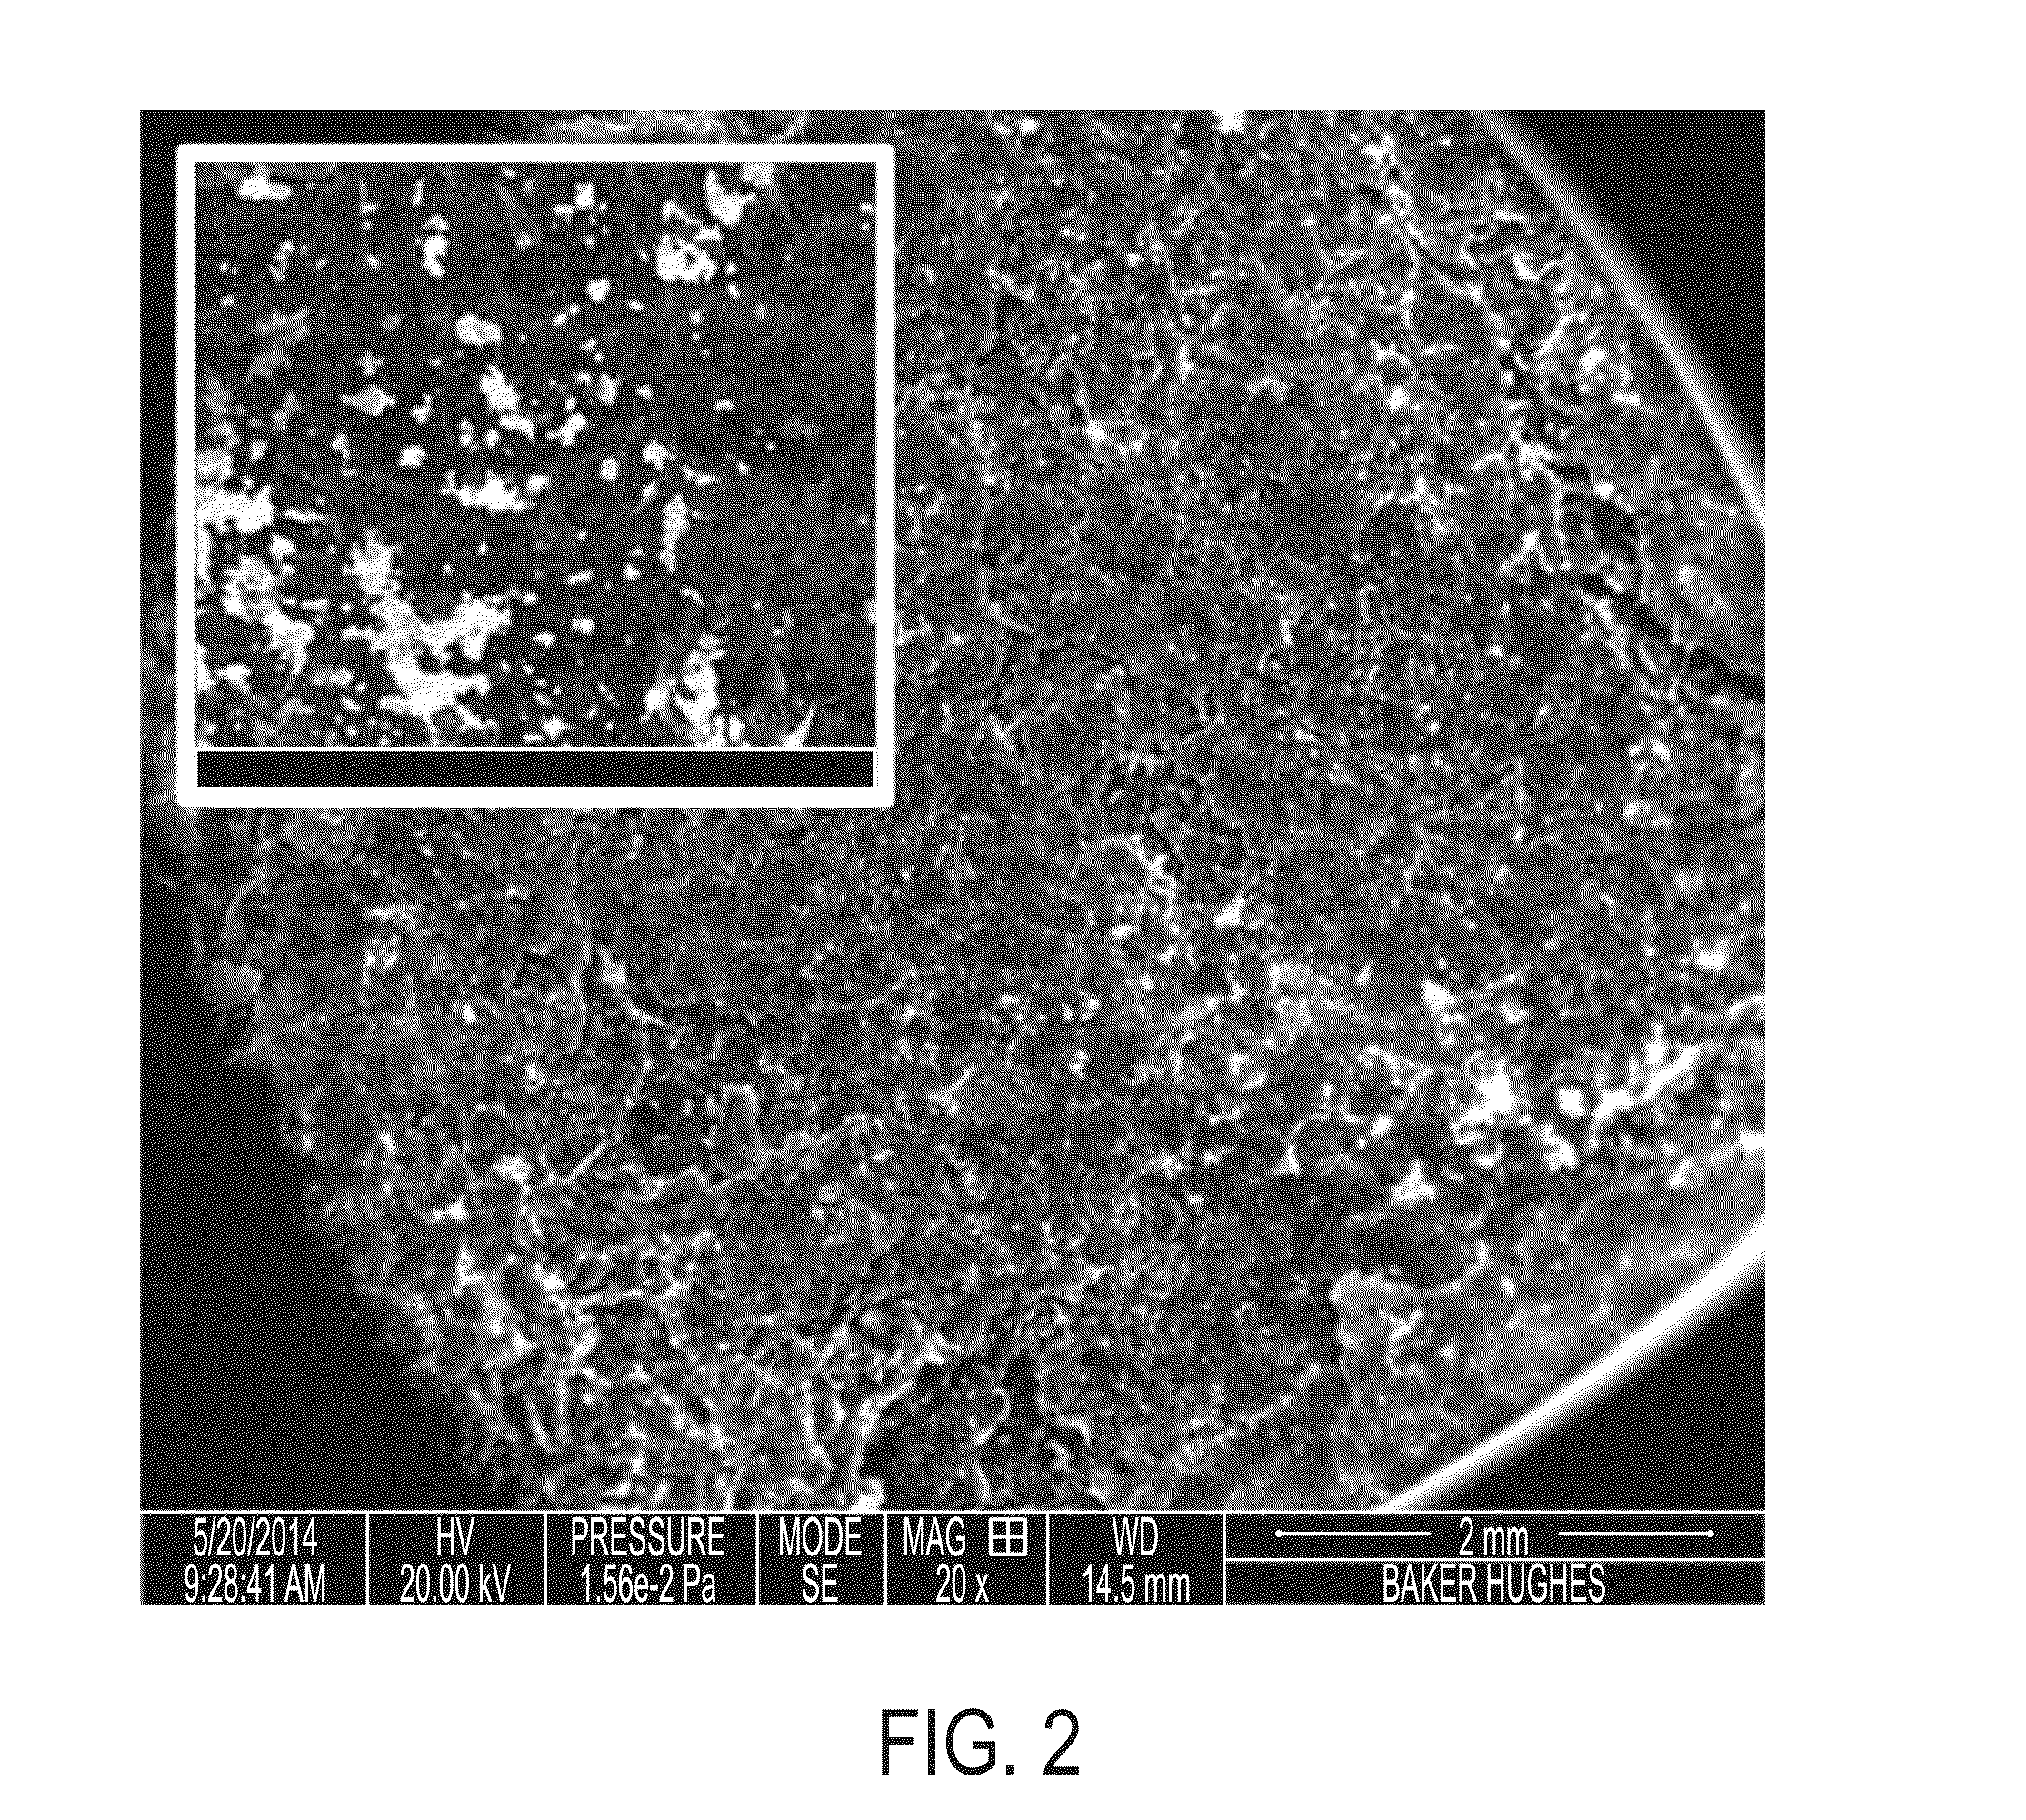 Methods of forming polymer coatings on metallic substrates